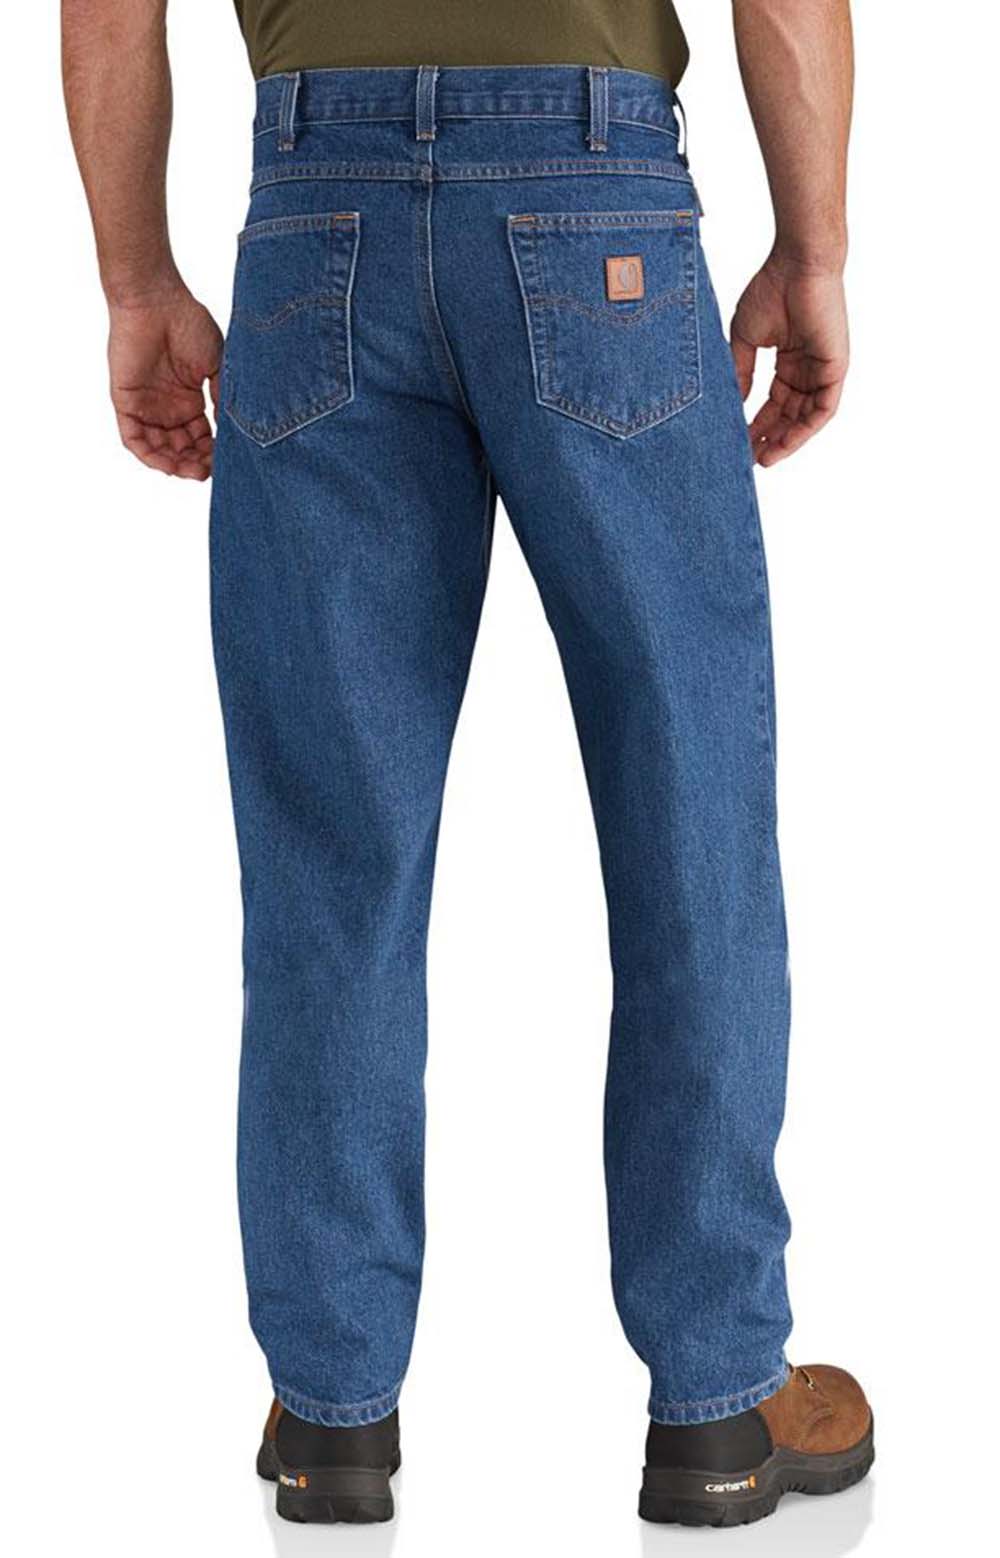 (B17) Relaxed Fit Tapered Leg Jeans - Darkstone